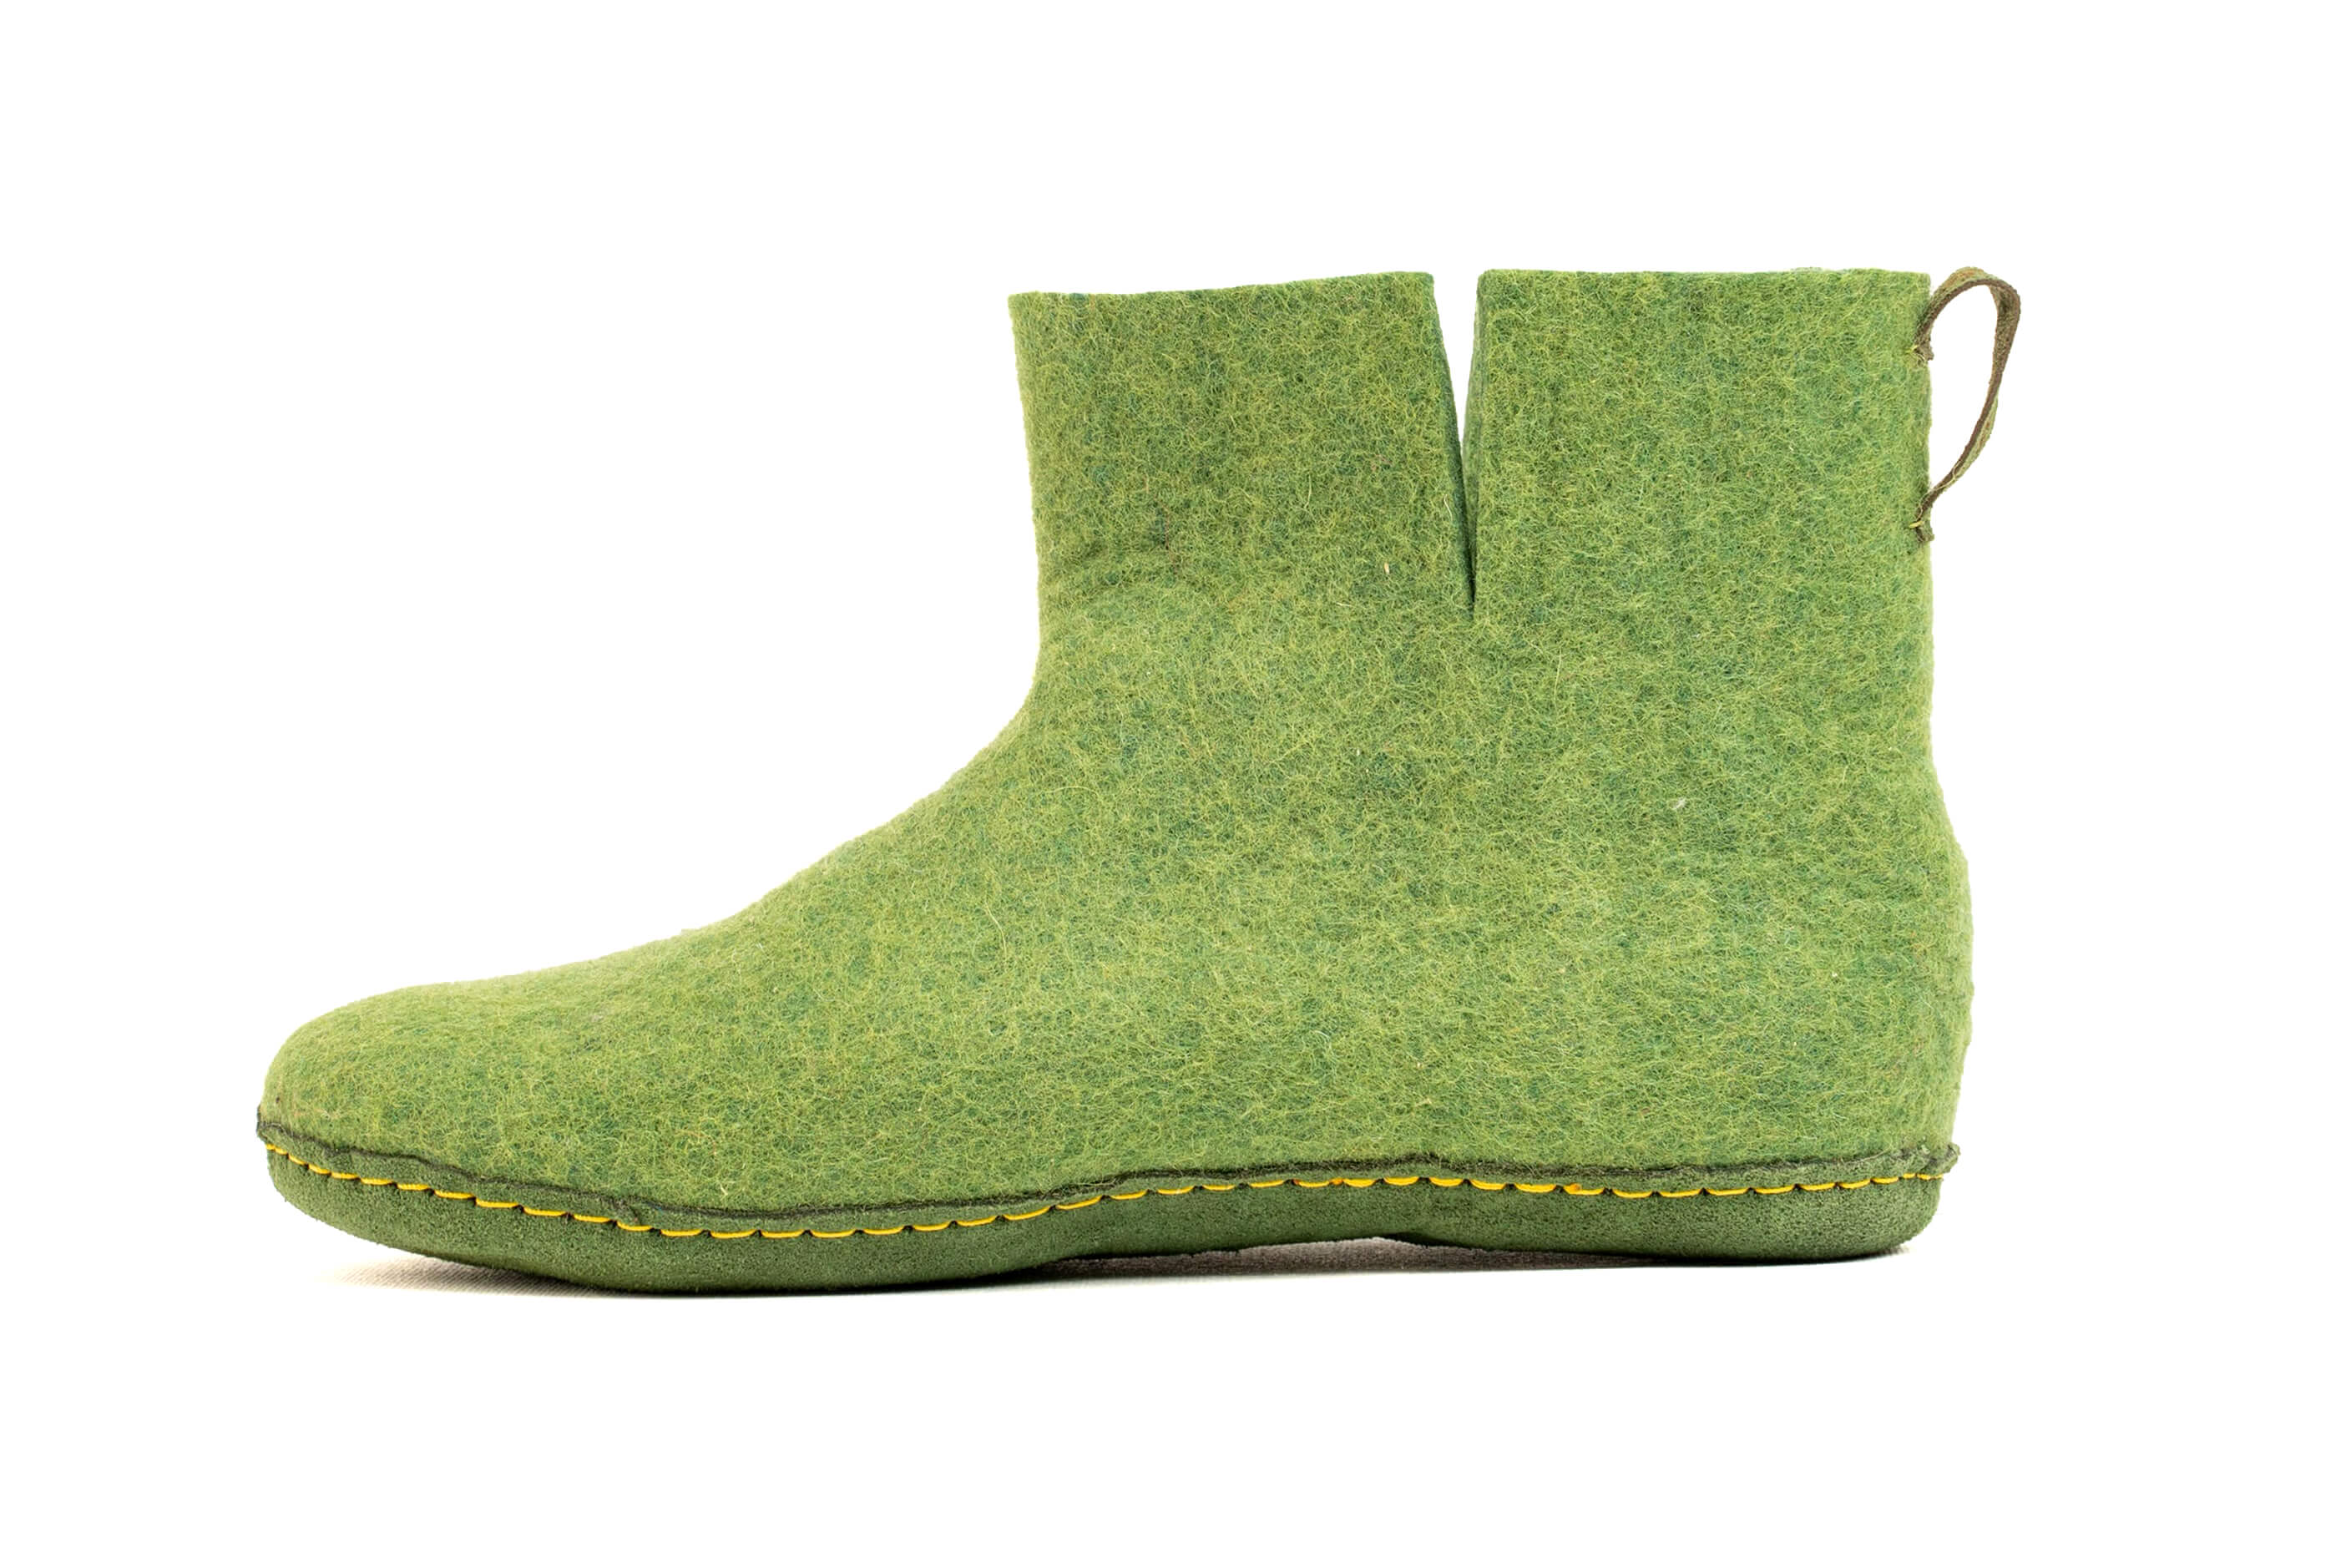 Indoor Boots With Leather Sole - Green